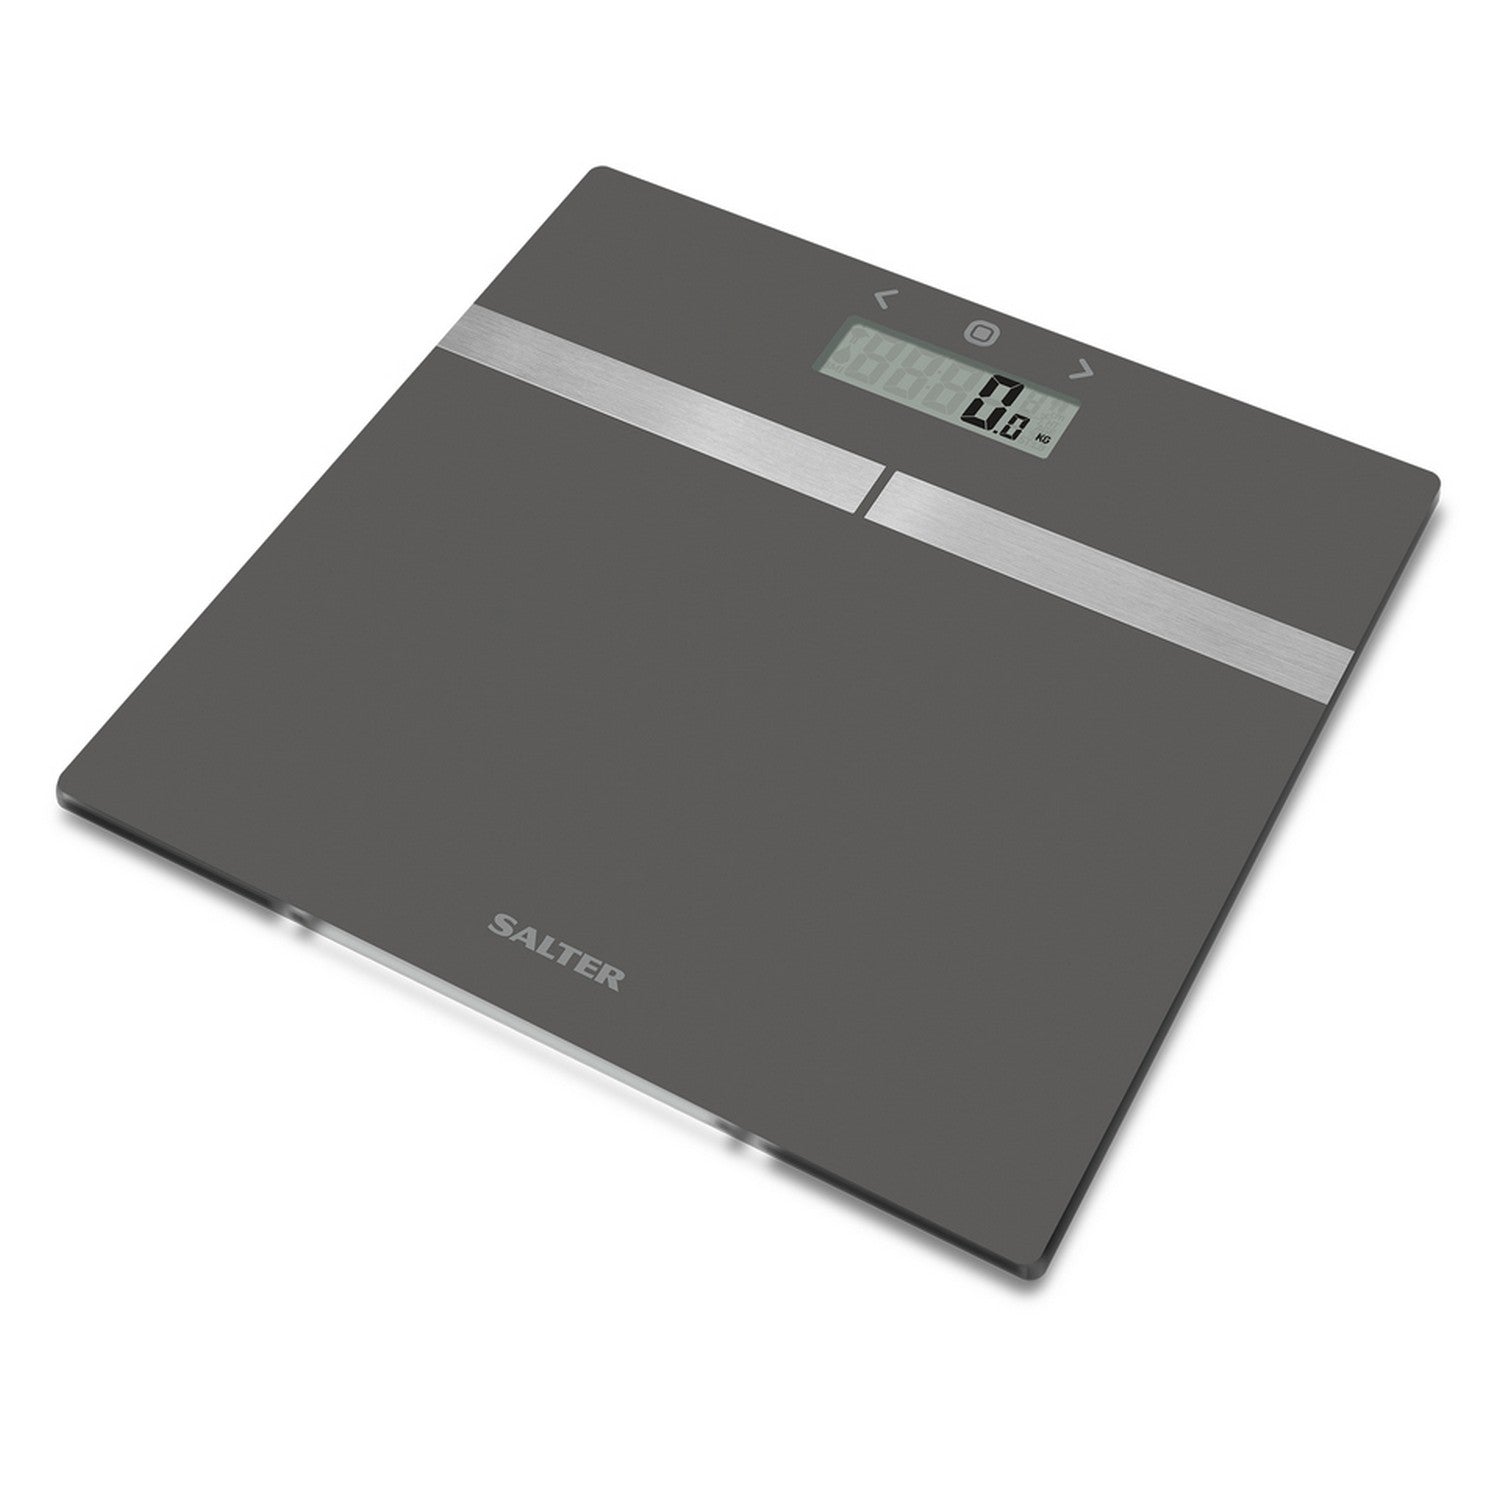 Salter Silver Glass Analyser Bathroom Weighing Scale